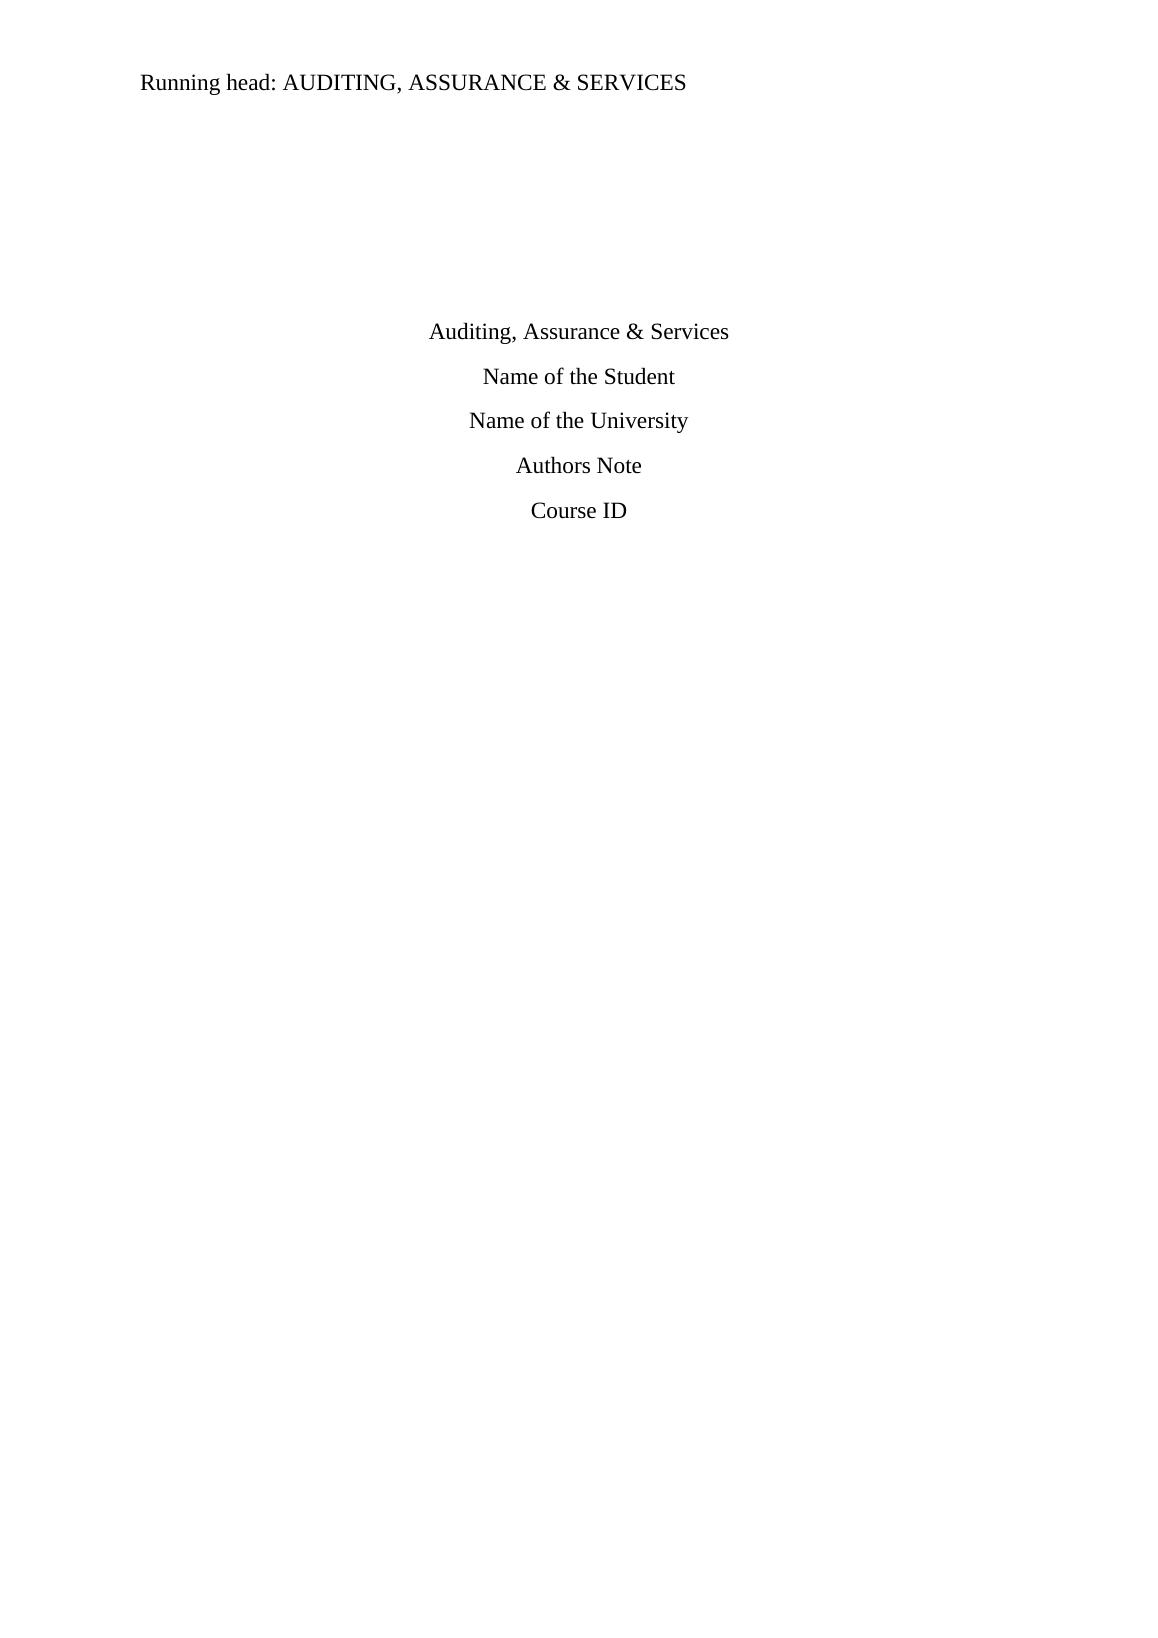 Auditing, Assurance & Services : Report_1